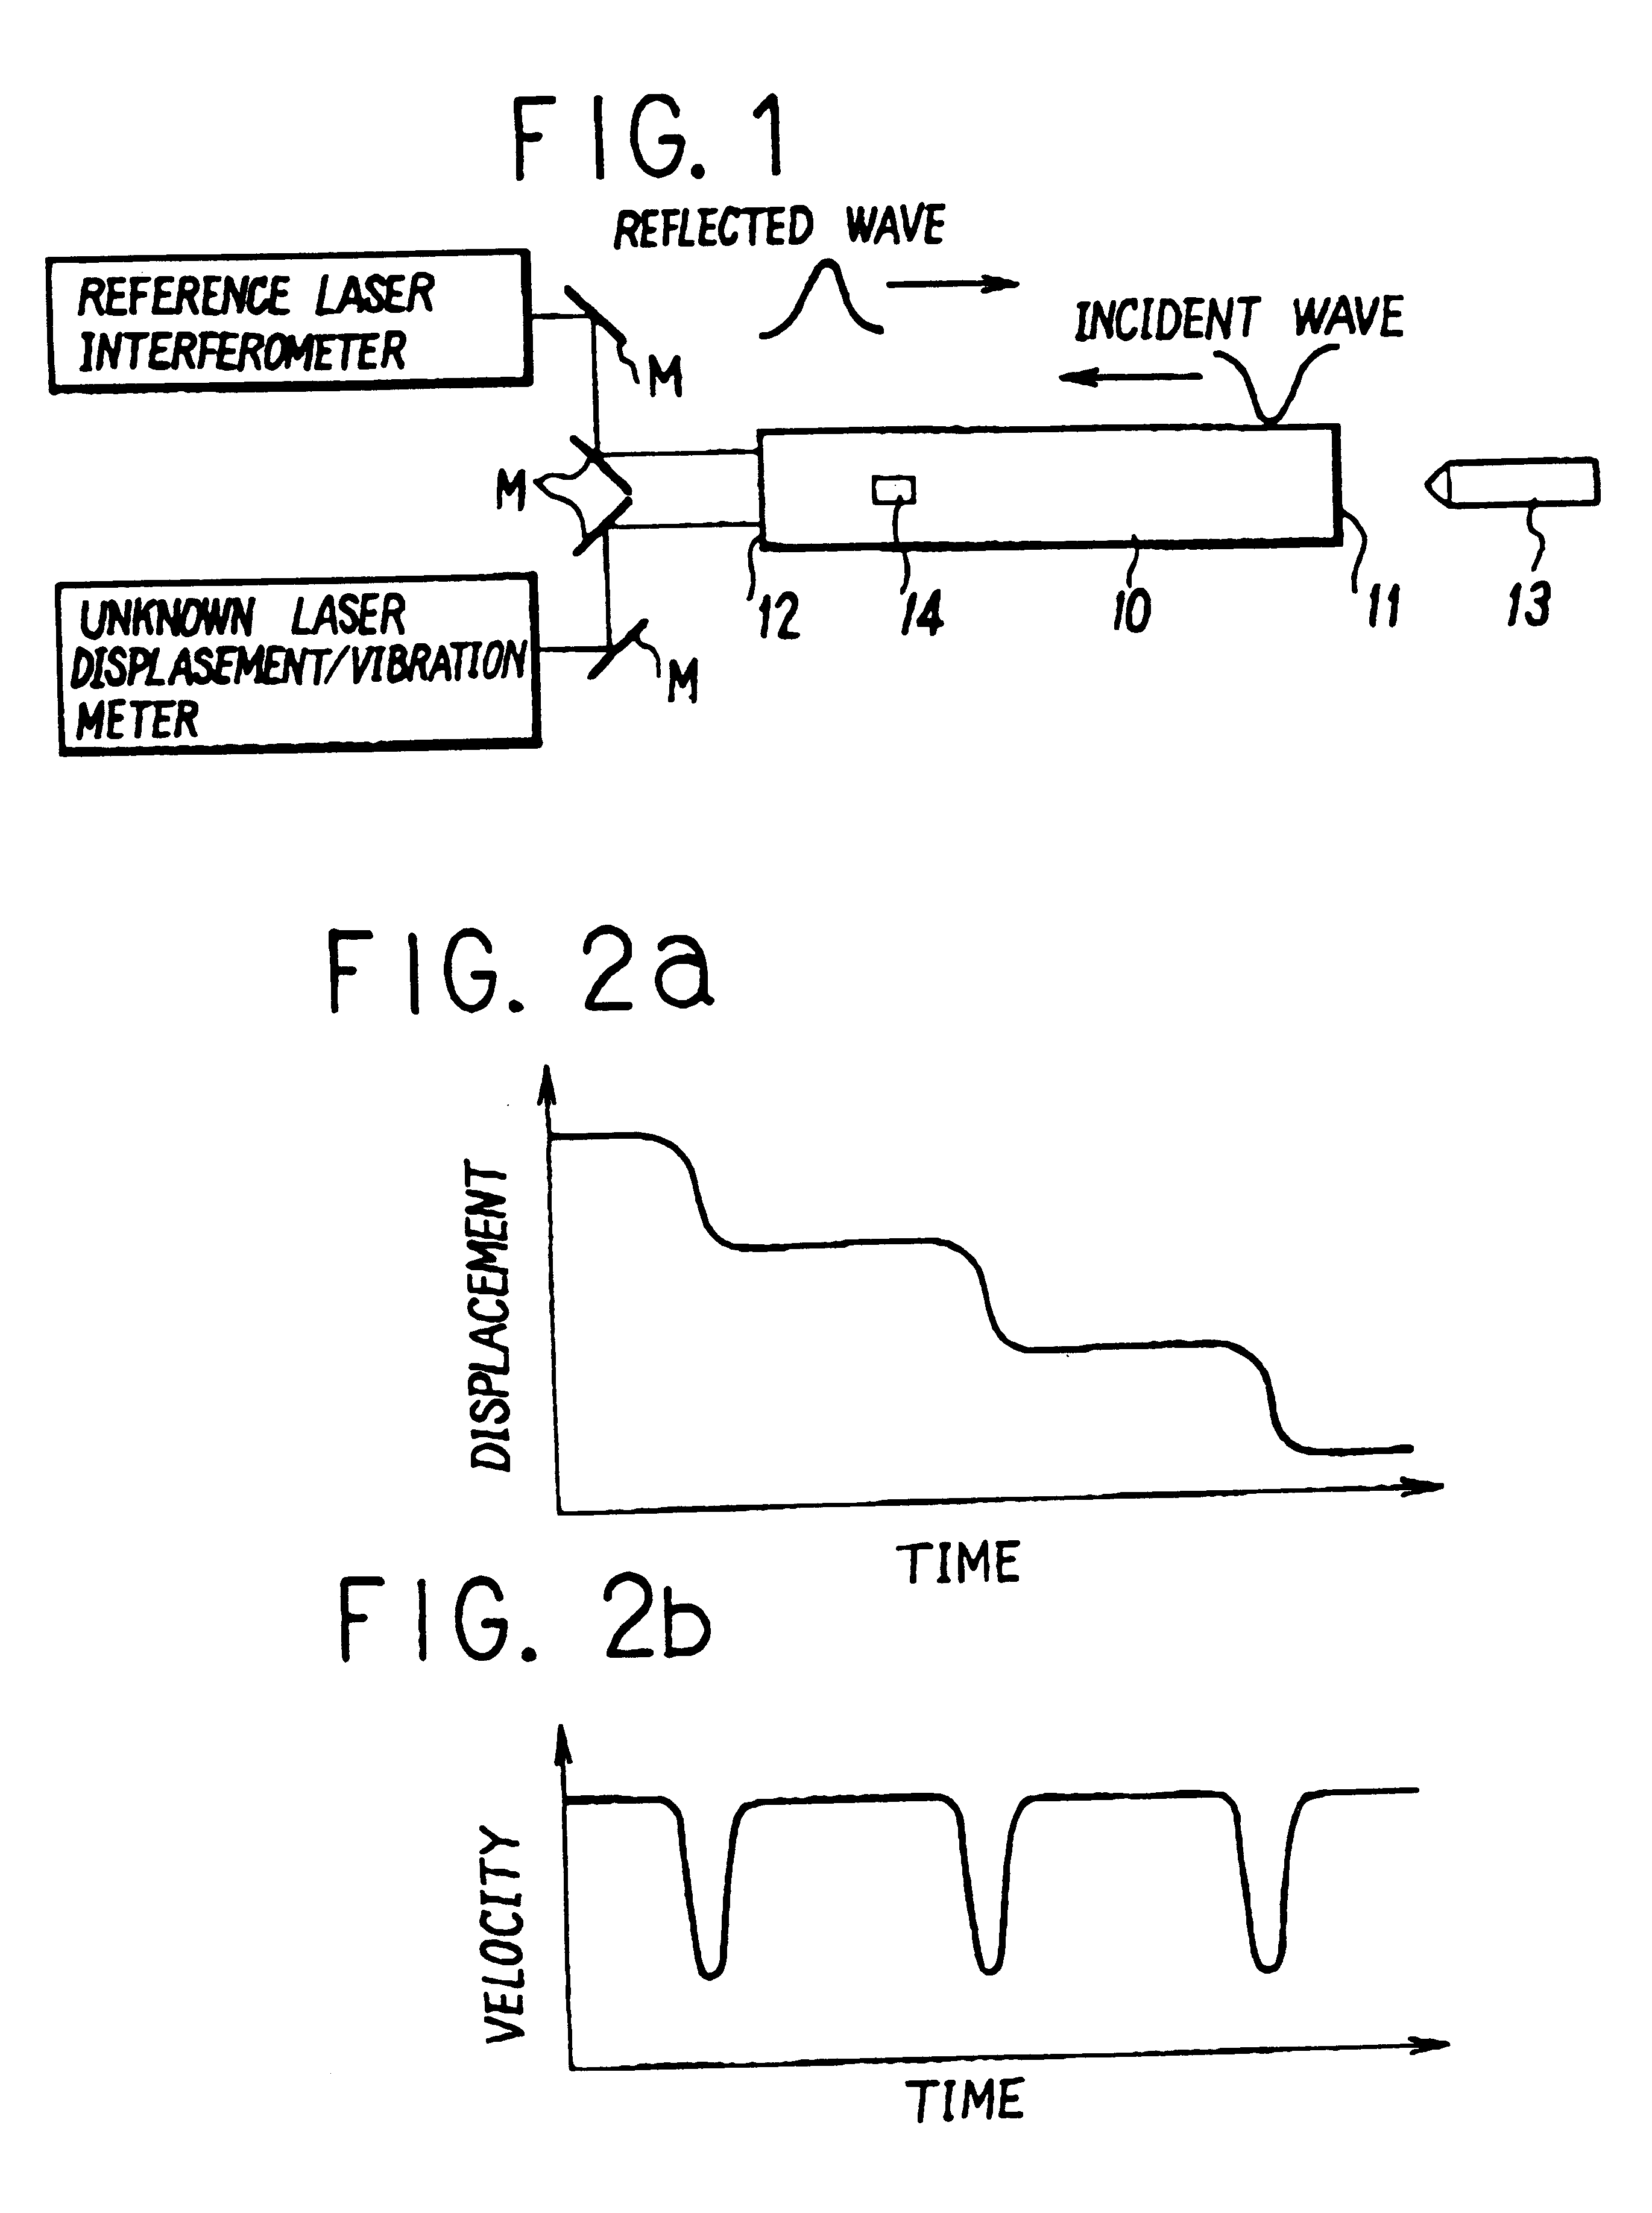 Method for testing frequency response characteristics of laser displacement/vibration meters